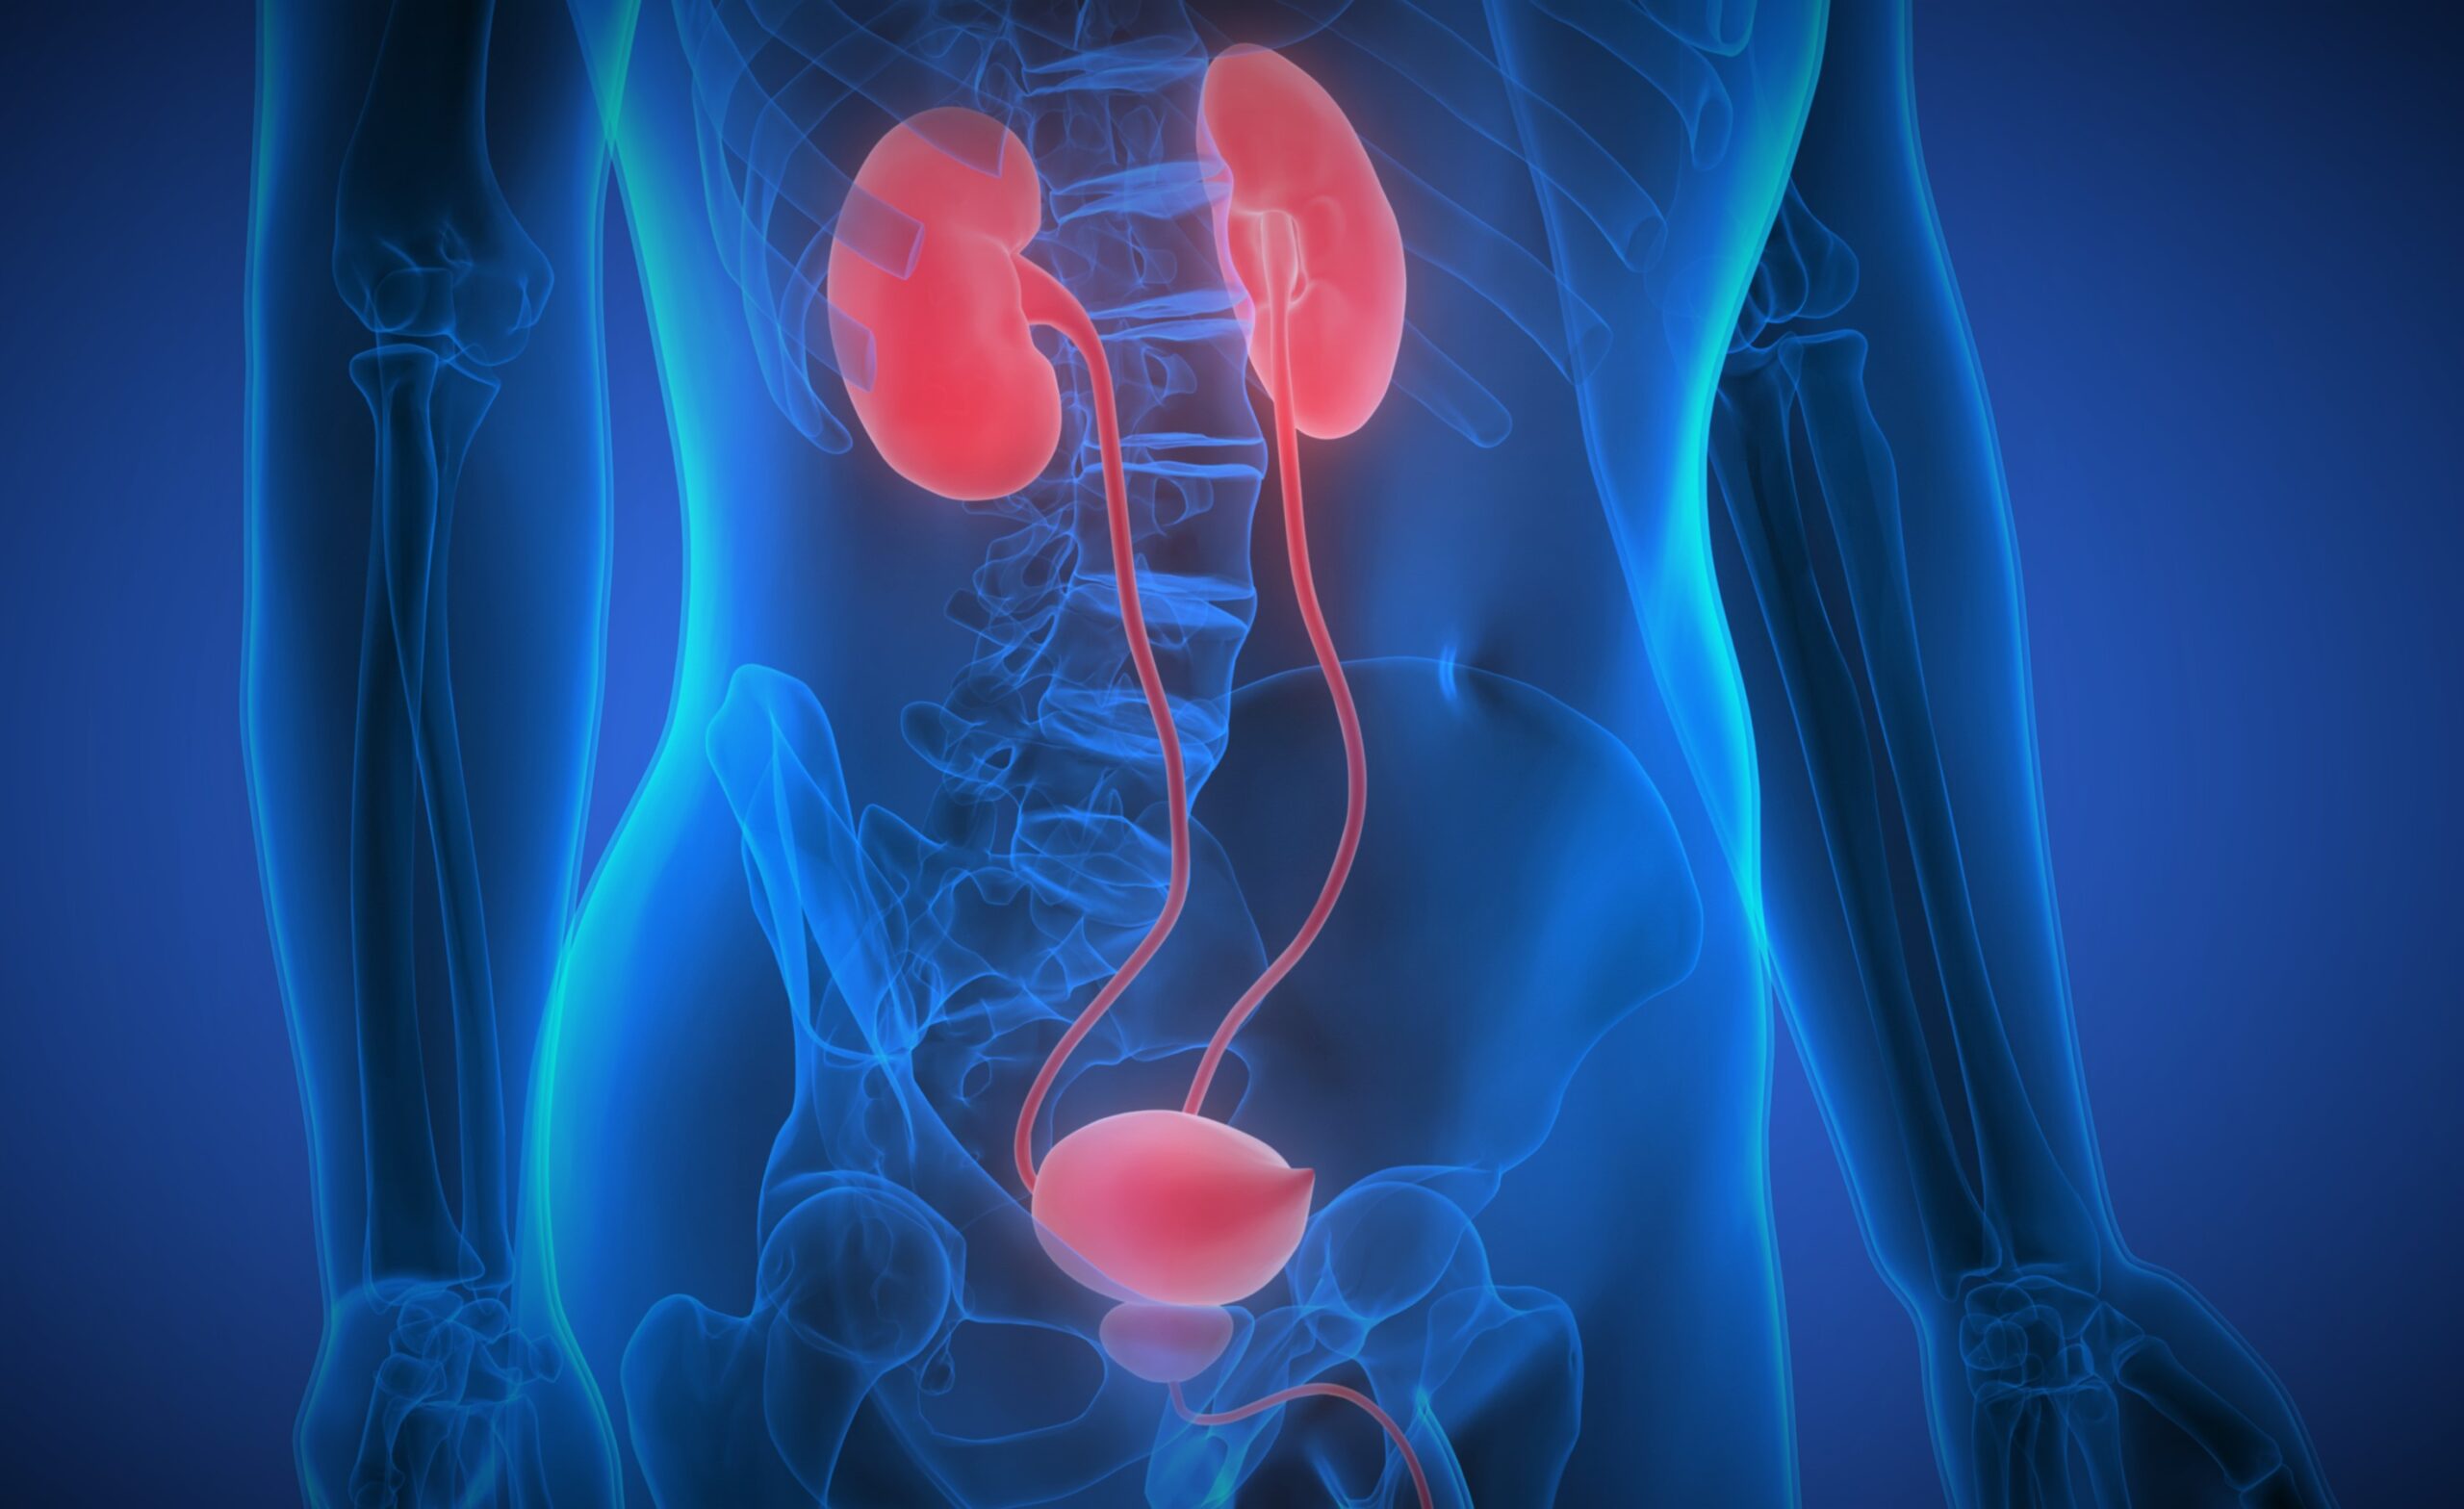 Urology and Pelvic Health Market – Growing Cases of Bladder Cancer & Kidney Stones